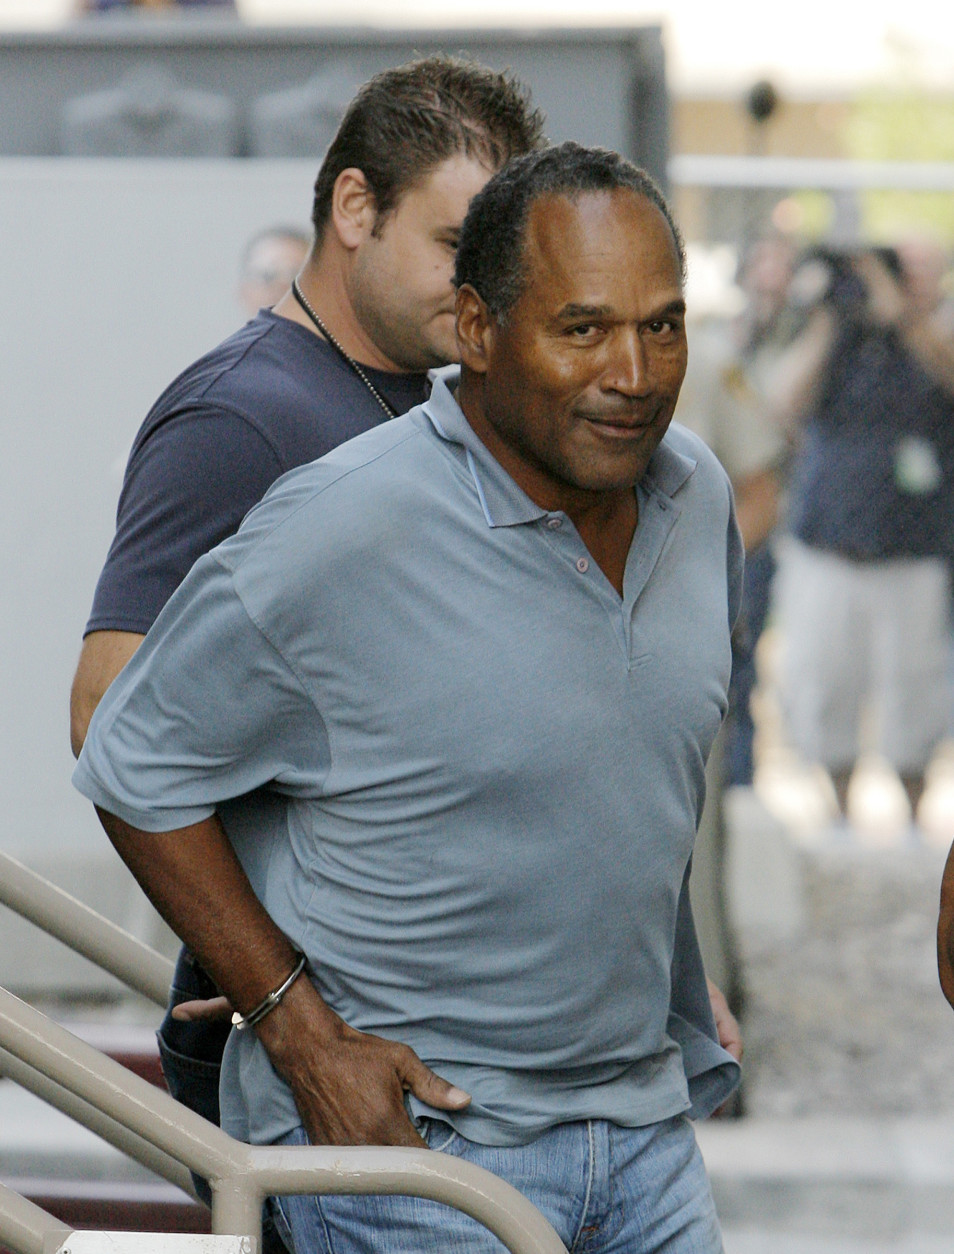 O.J. Simpson is transferred to the Clark County Detention Center in Las Vegas, in this Sunday, Sept. 16, 2007 file photo, after being arrested in connection with an alleged armed robbery in Las Vegas. Simpson wanted armed men with him when he confronted two sports memorabilia dealers, according to a co-defendant who pleaded guilty and has agreed to testify for the prosecution in the armed robbery case. (AP Photo/Jae C. Hong)